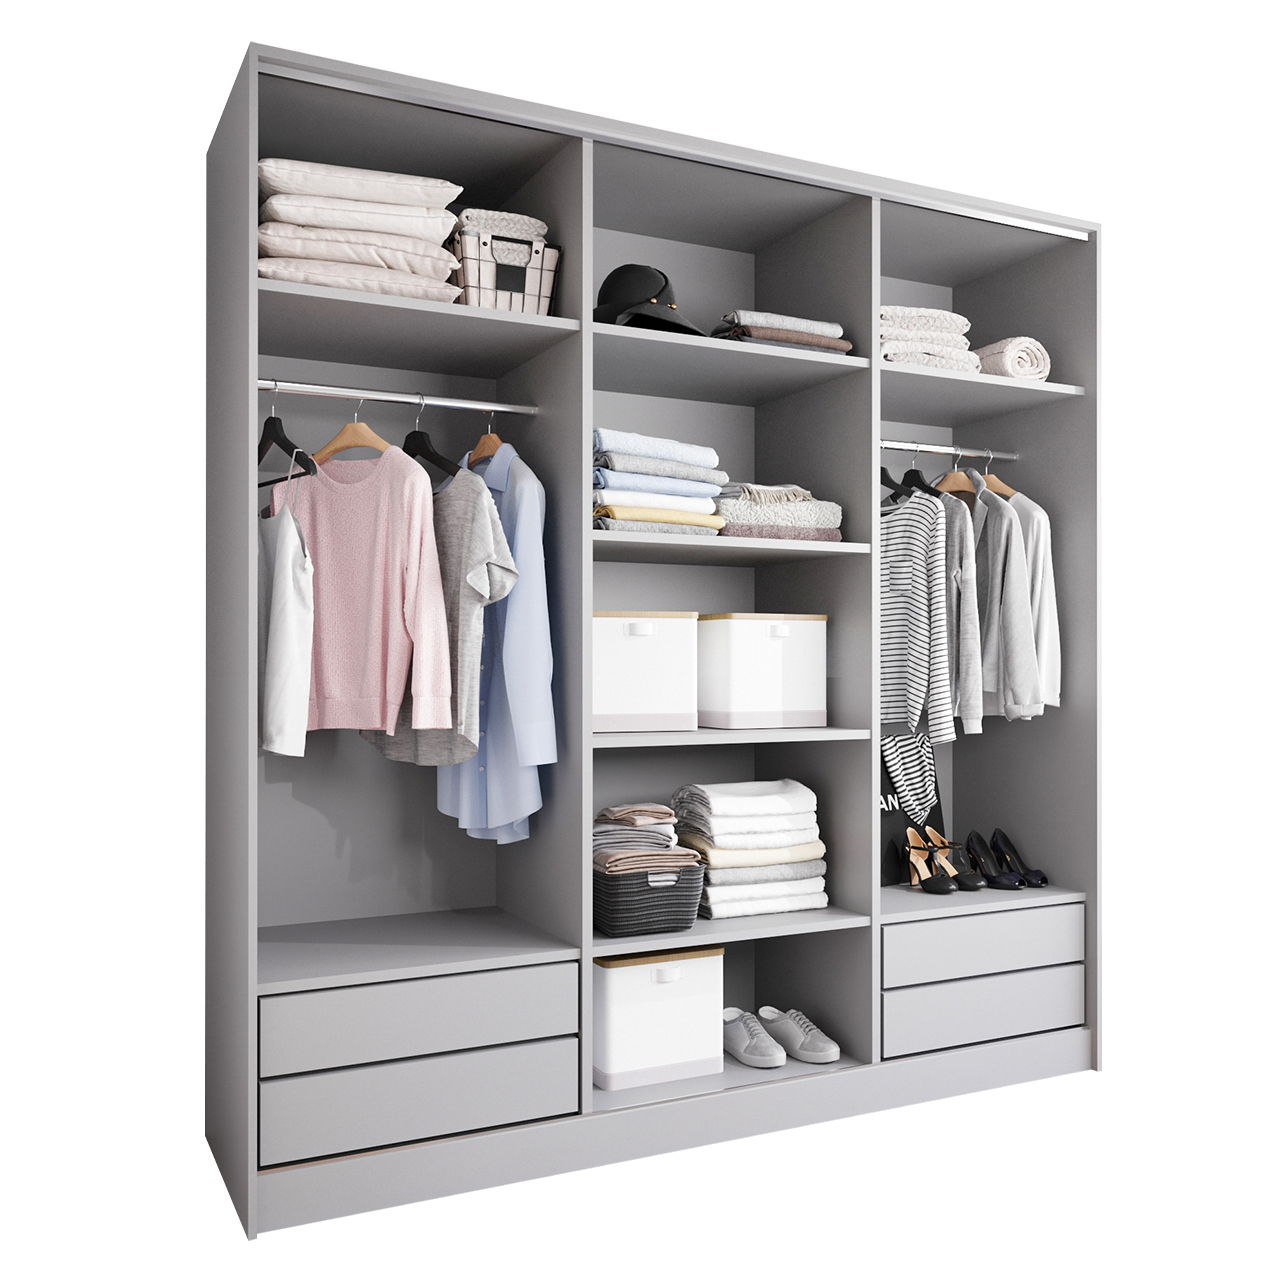 Sliding Wardrobe with Mirror and Drawers GRANO D 200 grey